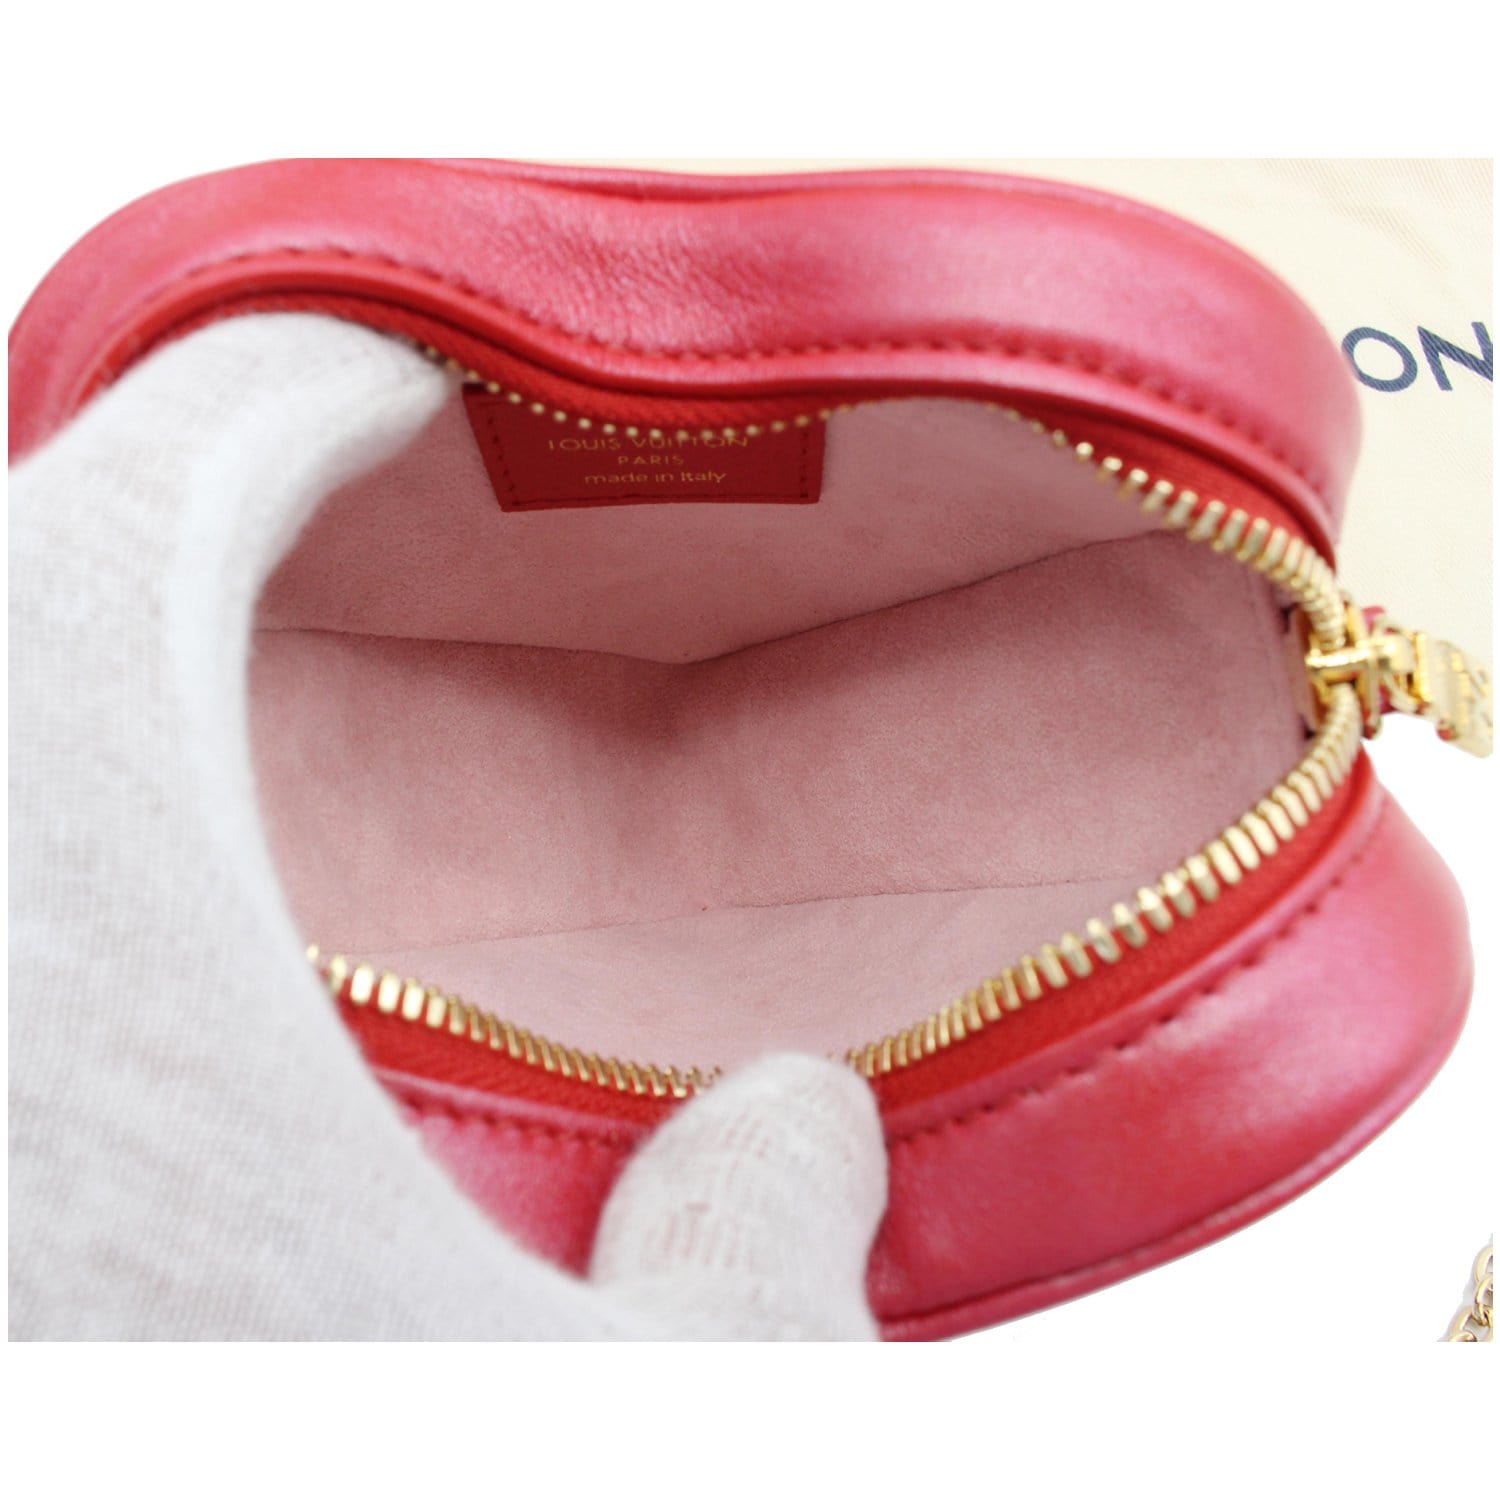 Heart coin purse in genuine leather Made in Italy